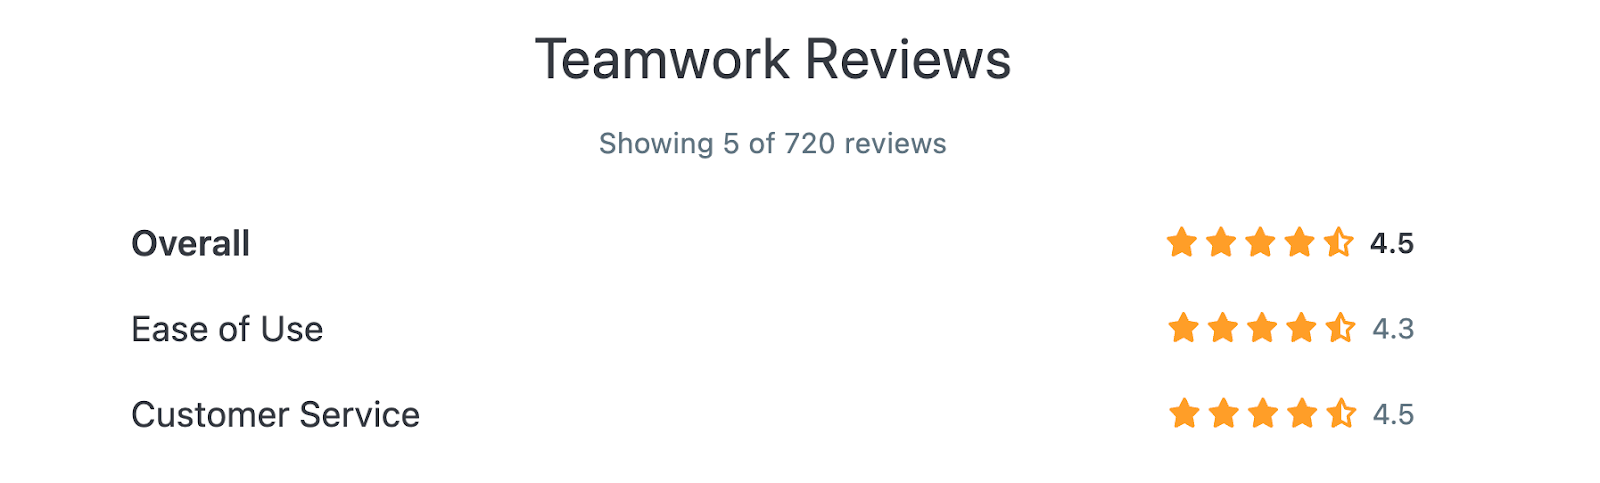 Teamwork reviews on Capterra (Overall: 4.5, Ease of Use: 4.3, Customer Service: 4.5)